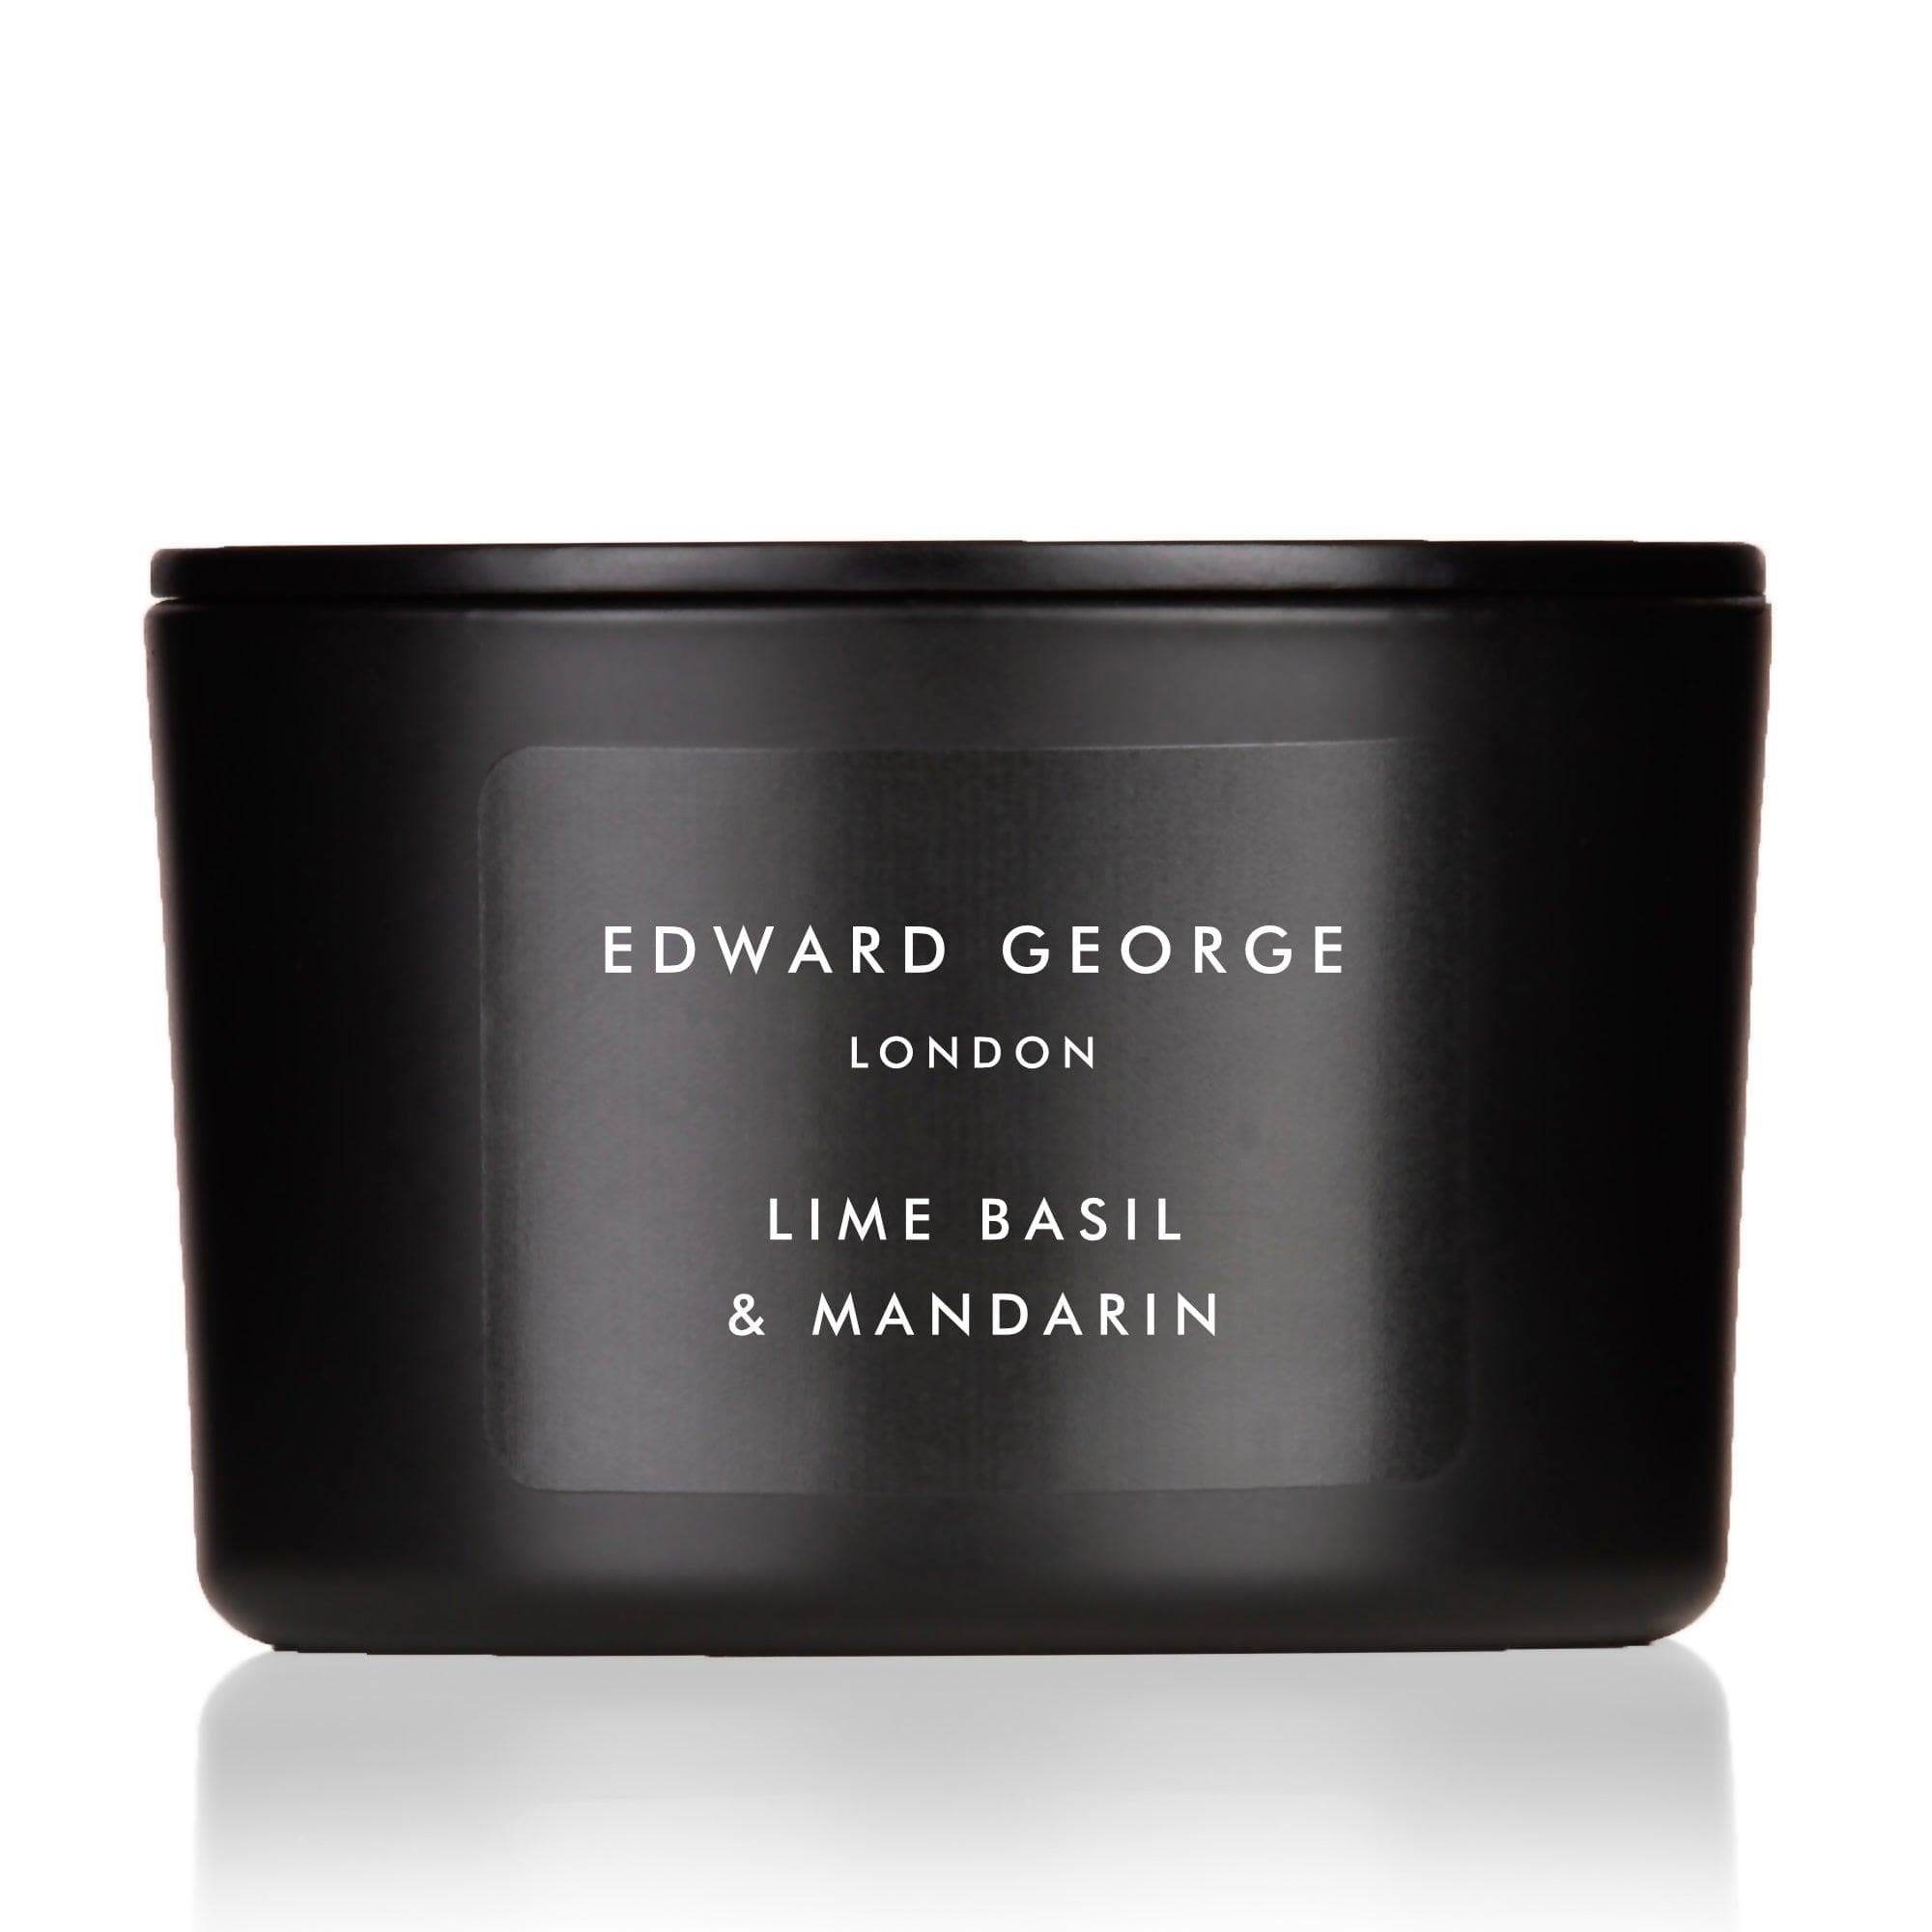 lime basil mandarin candles home fragrance decor room living room edward george london luxury gift ritual scent set lid zinc alloy black wax best black scented candle women men small